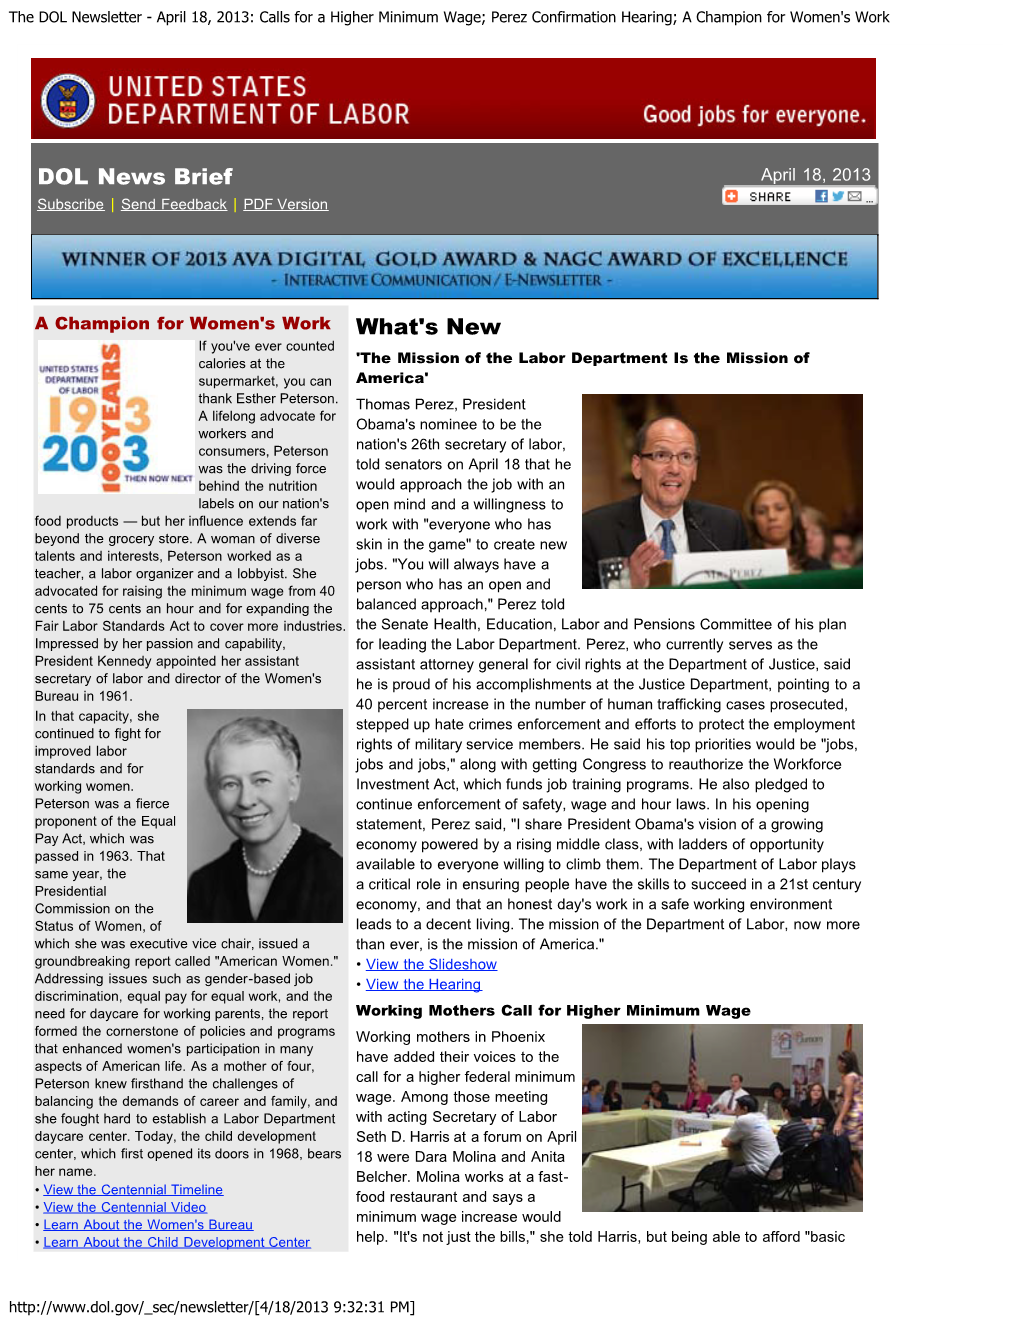 The DOL Newsletter - April 18, 2013: Calls for a Higher Minimum Wage; Perez Confirmation Hearing; a Champion for Women's Work